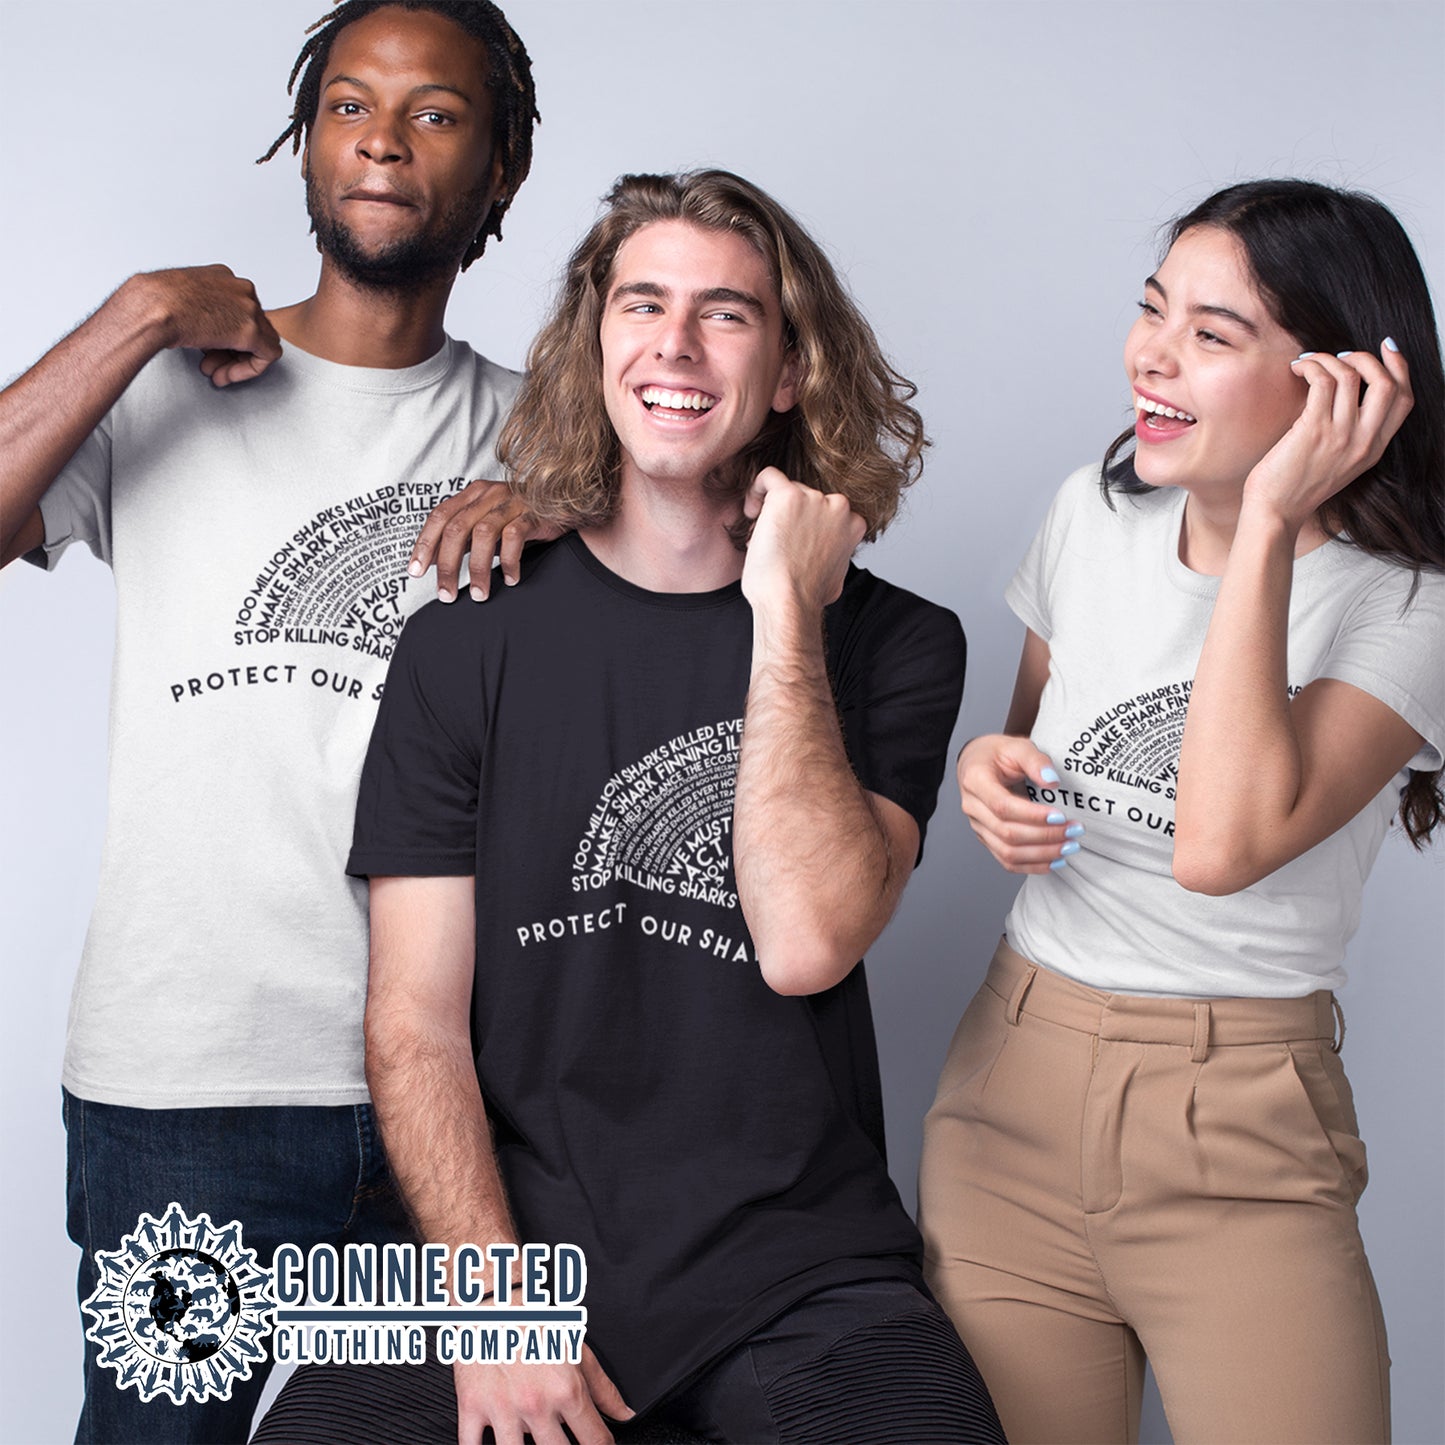 Black and White Protect Our Sharks Short-Sleeve Tees - architectconstructor - Ethically and Sustainably Made - 10% of profits donated to shark conservation and ocean conservation